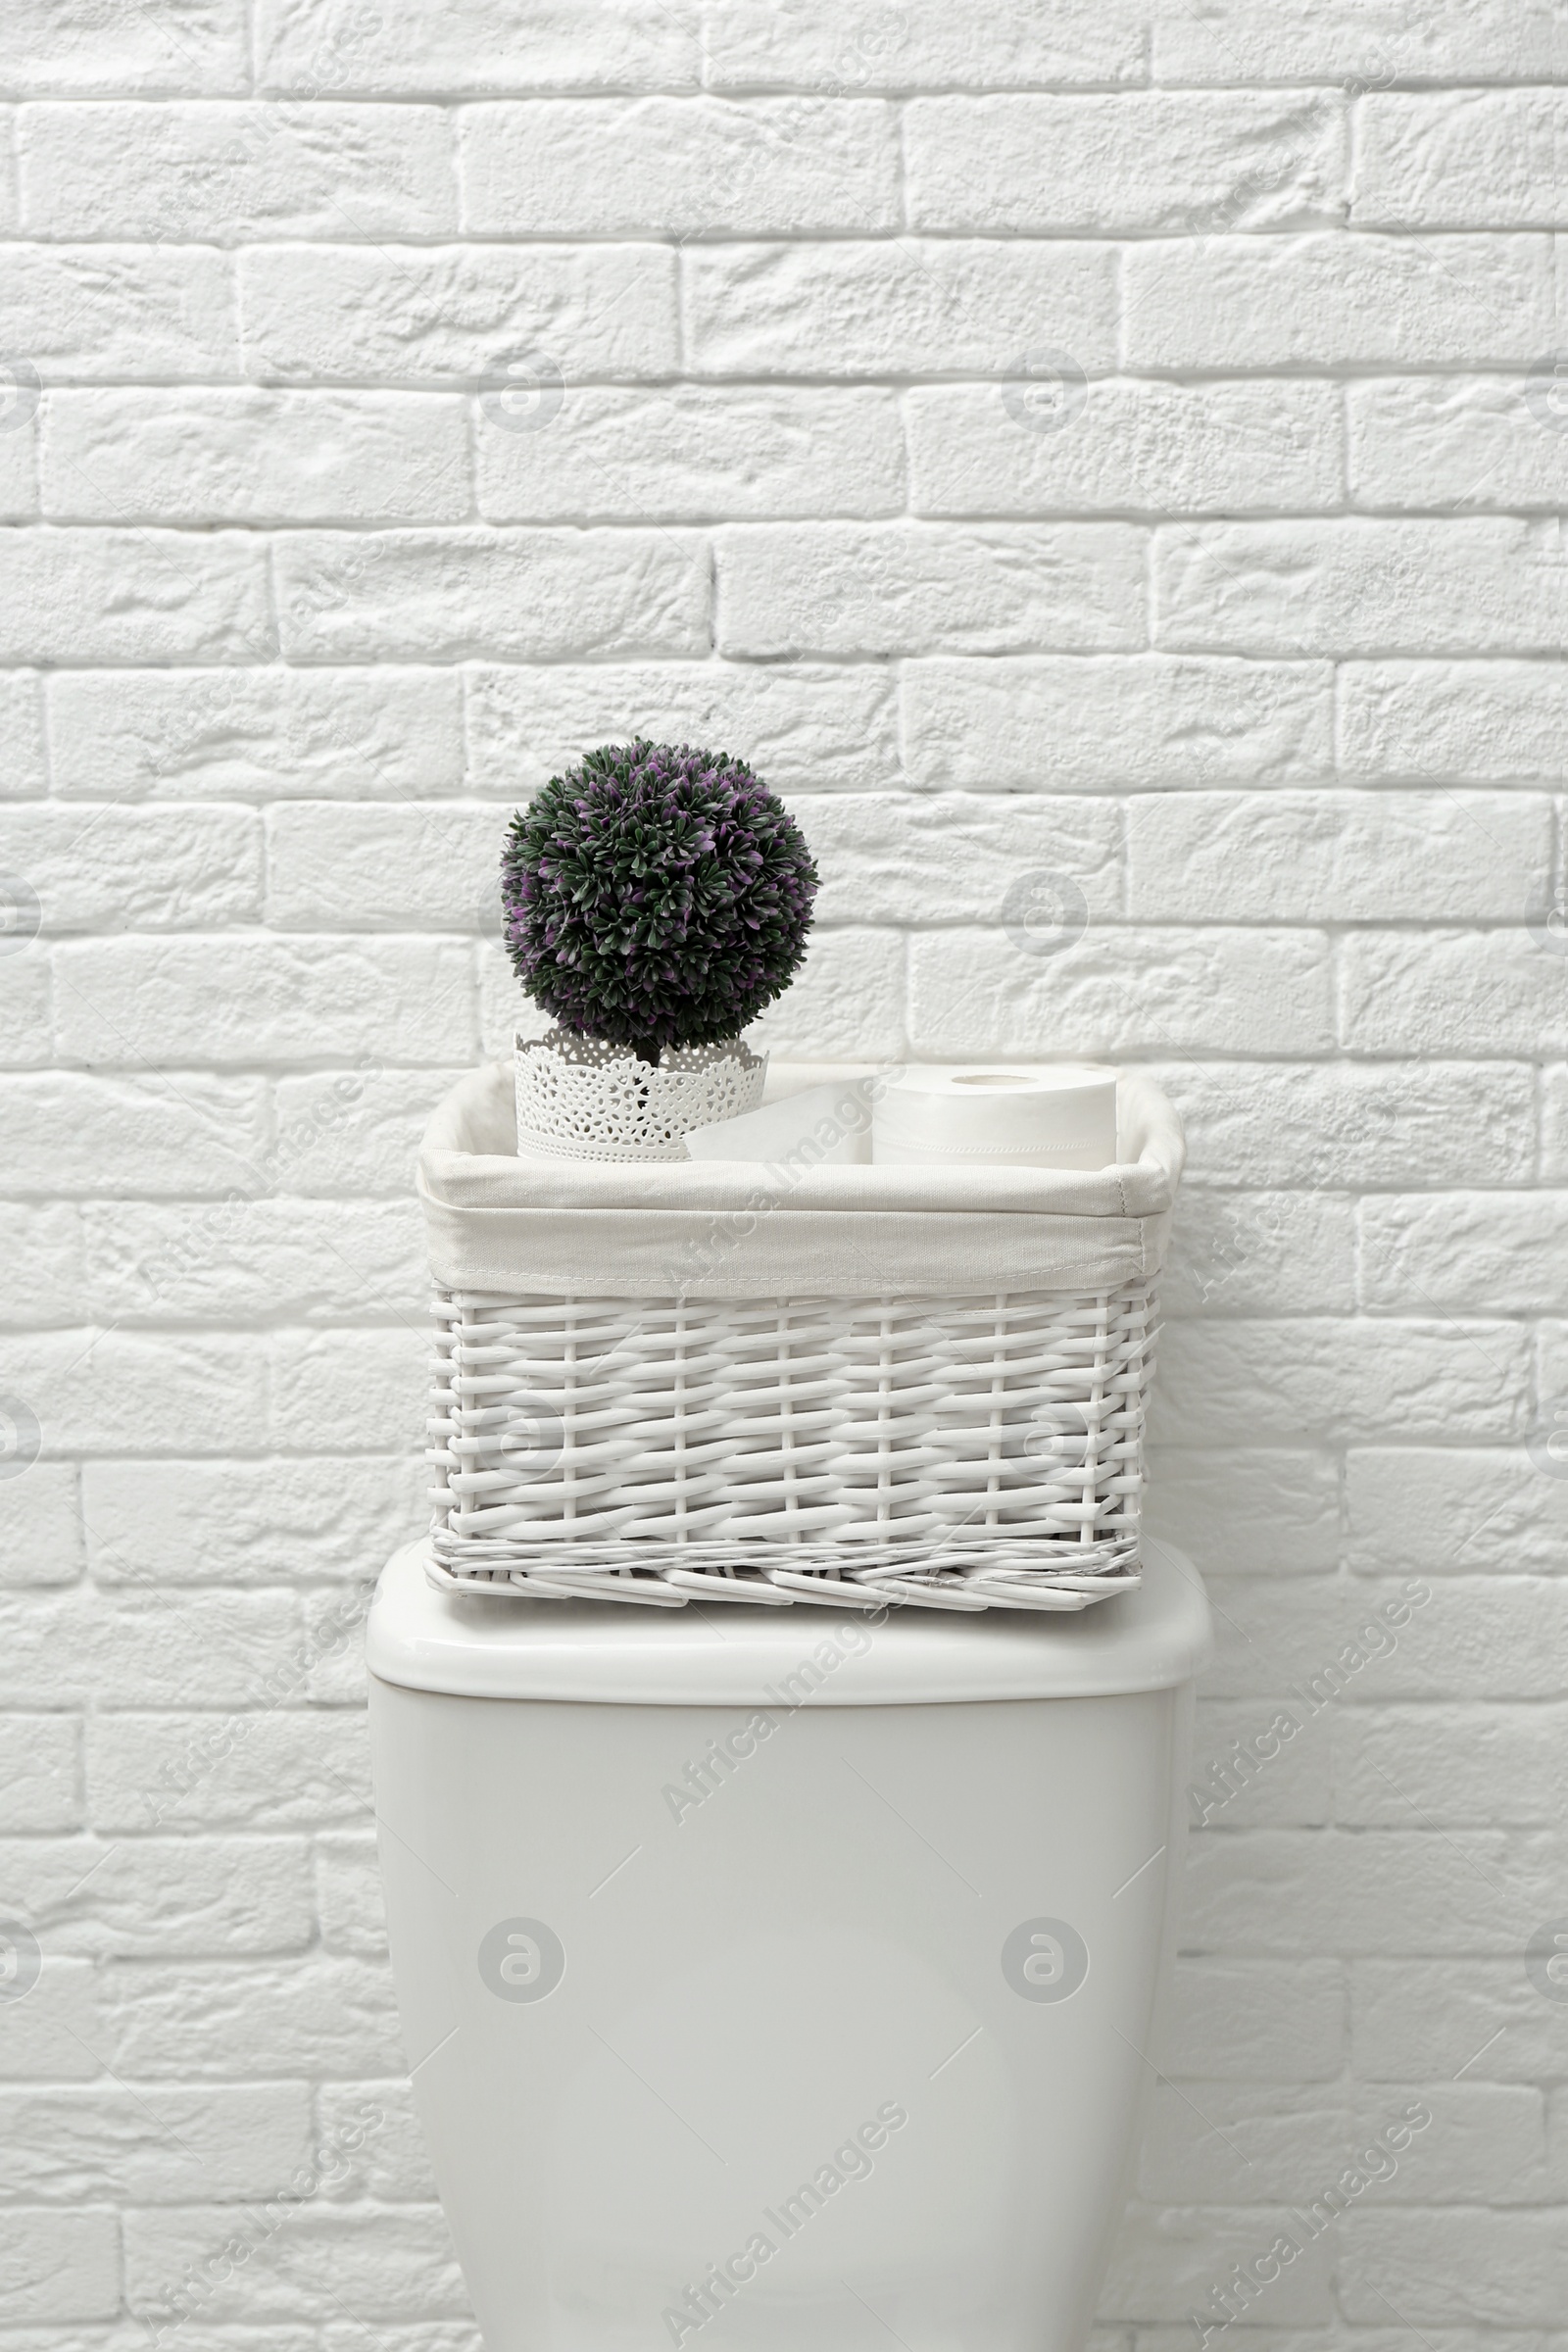 Photo of Basket with roll of paper and decorative plant on toilet tank near white brick wall. Bathroom interior